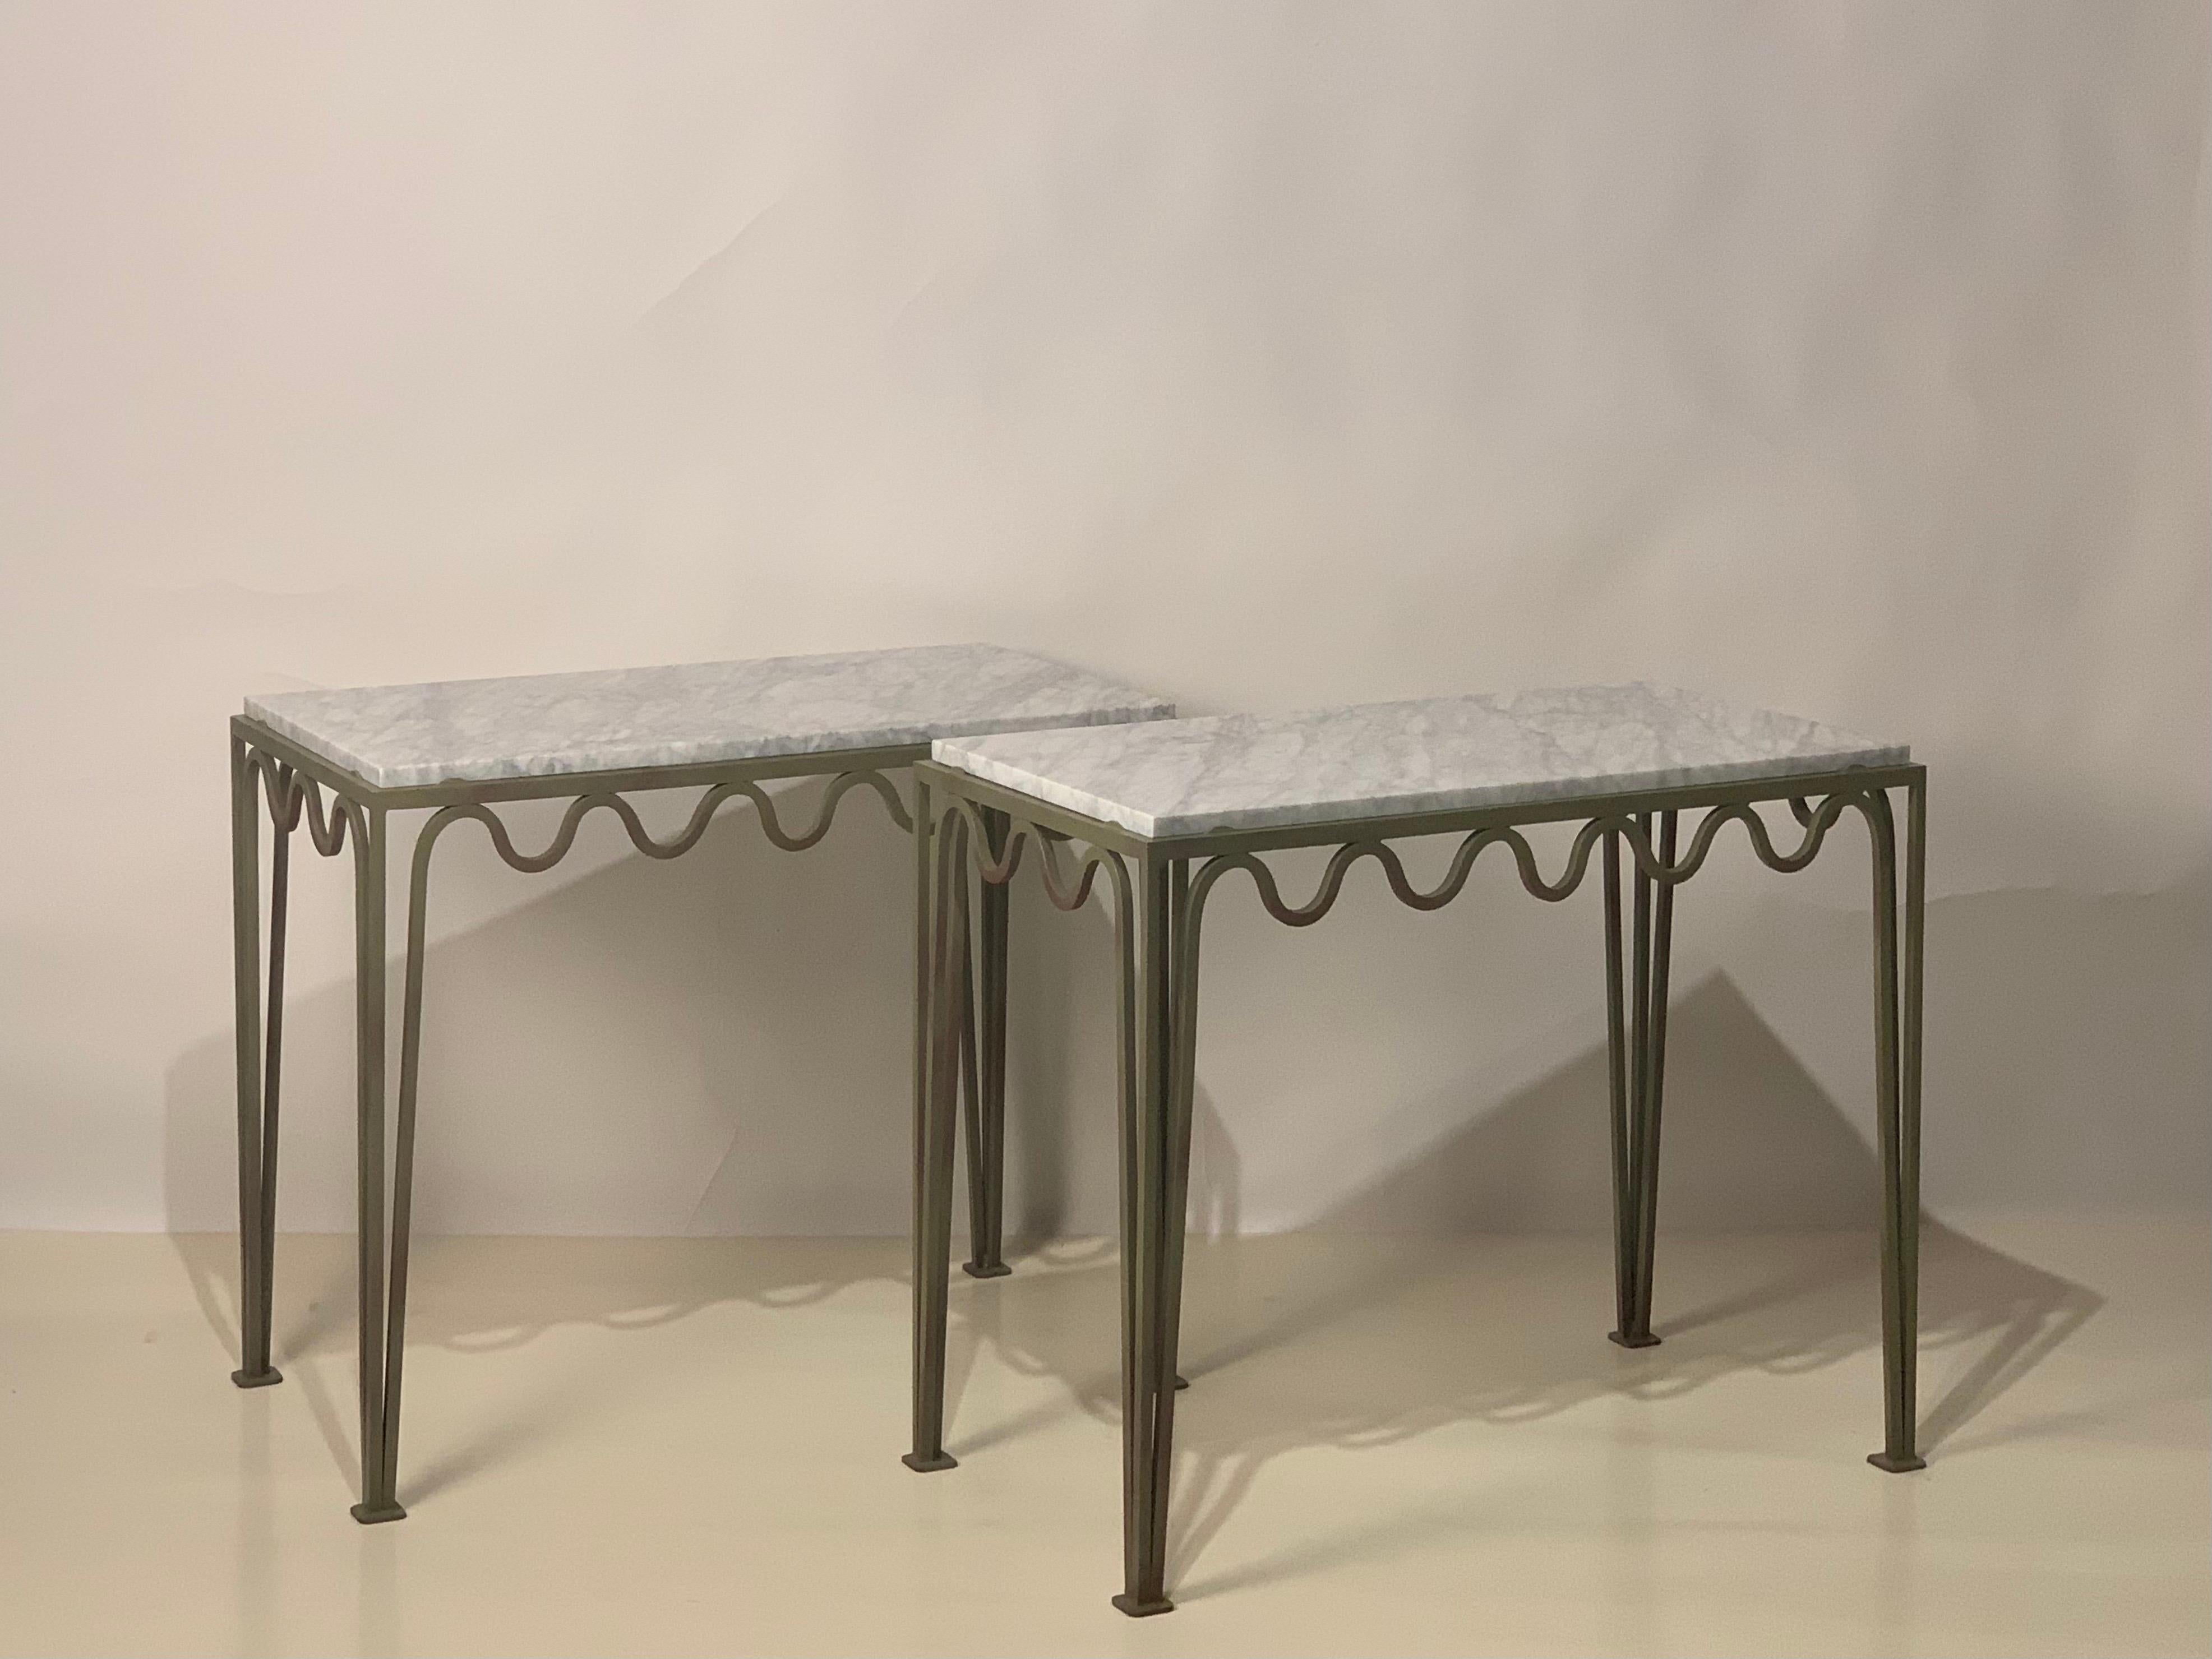 Gorgeous veined white marble tops fitted over meandering verdigris steel frames. Beautifully simple, understated design.

These consoles from our exclusive Design Frères line are handmade in our Los Angeles atelier by our skilled artisans. These